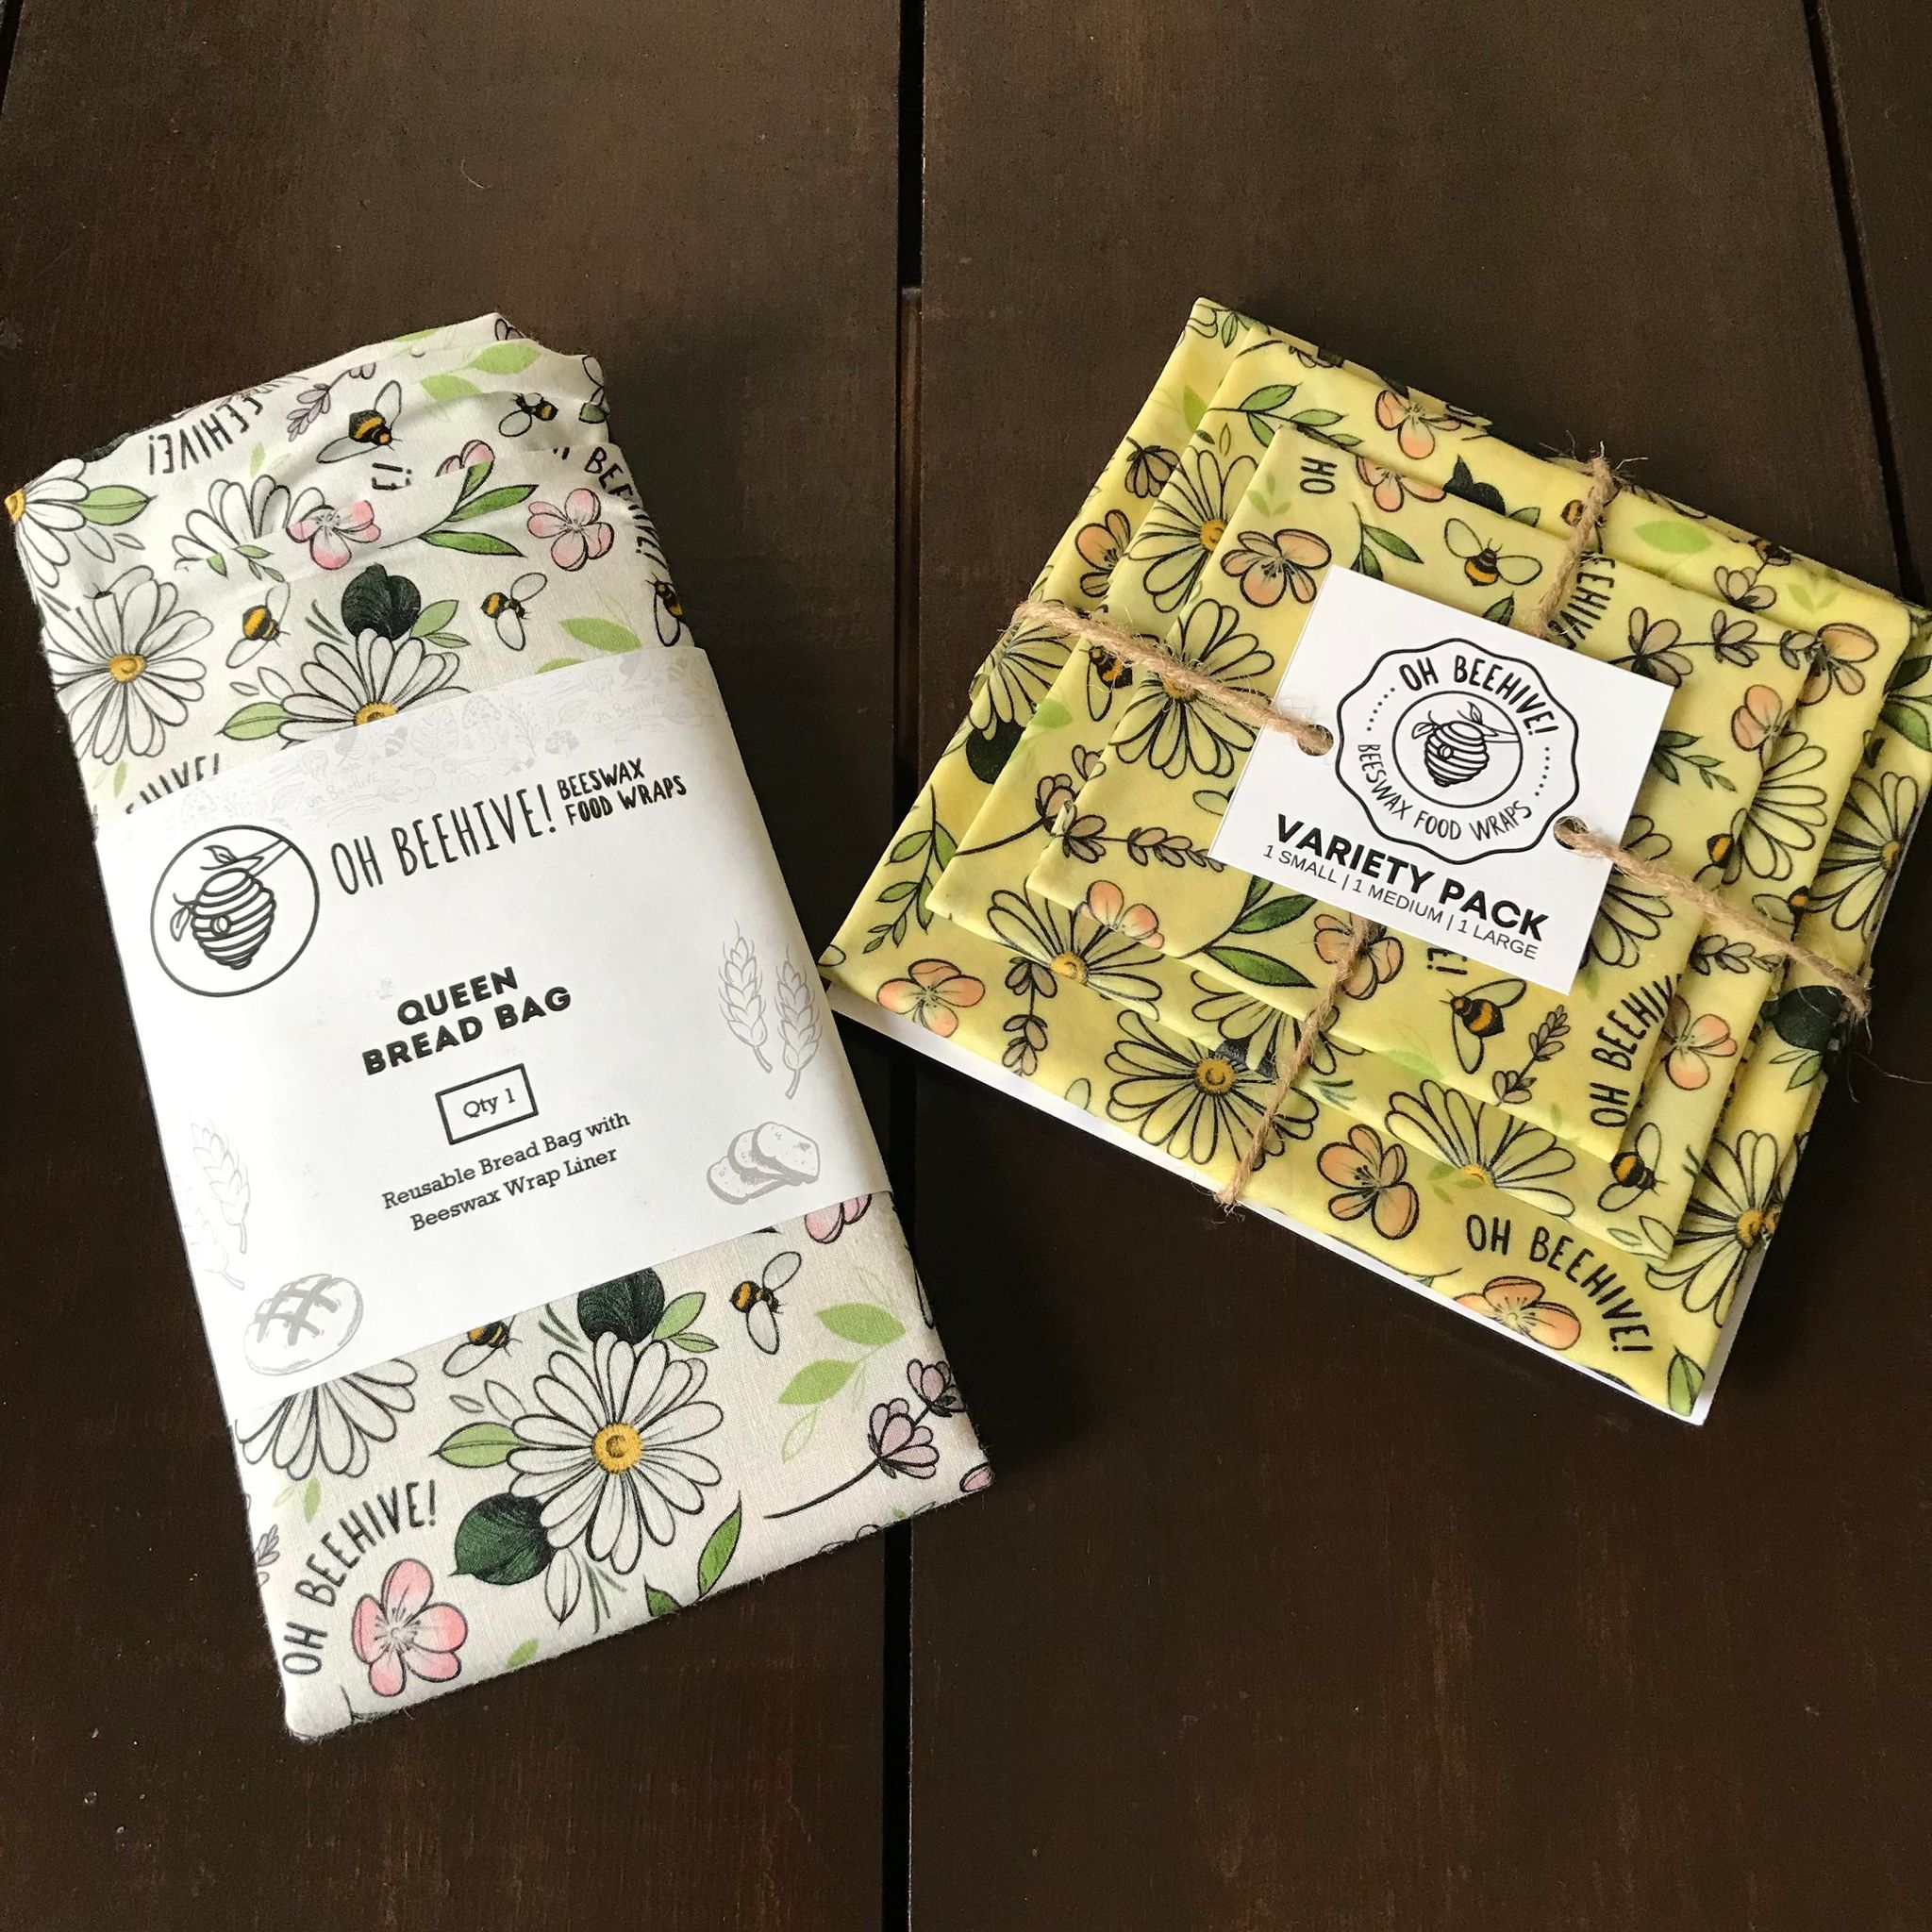  This Floral Pollinator Beeswax Wraps and Bread Bag Sets from Oh Beehive Beeswax Food Wraps comes in a lovely bee and flower pattern